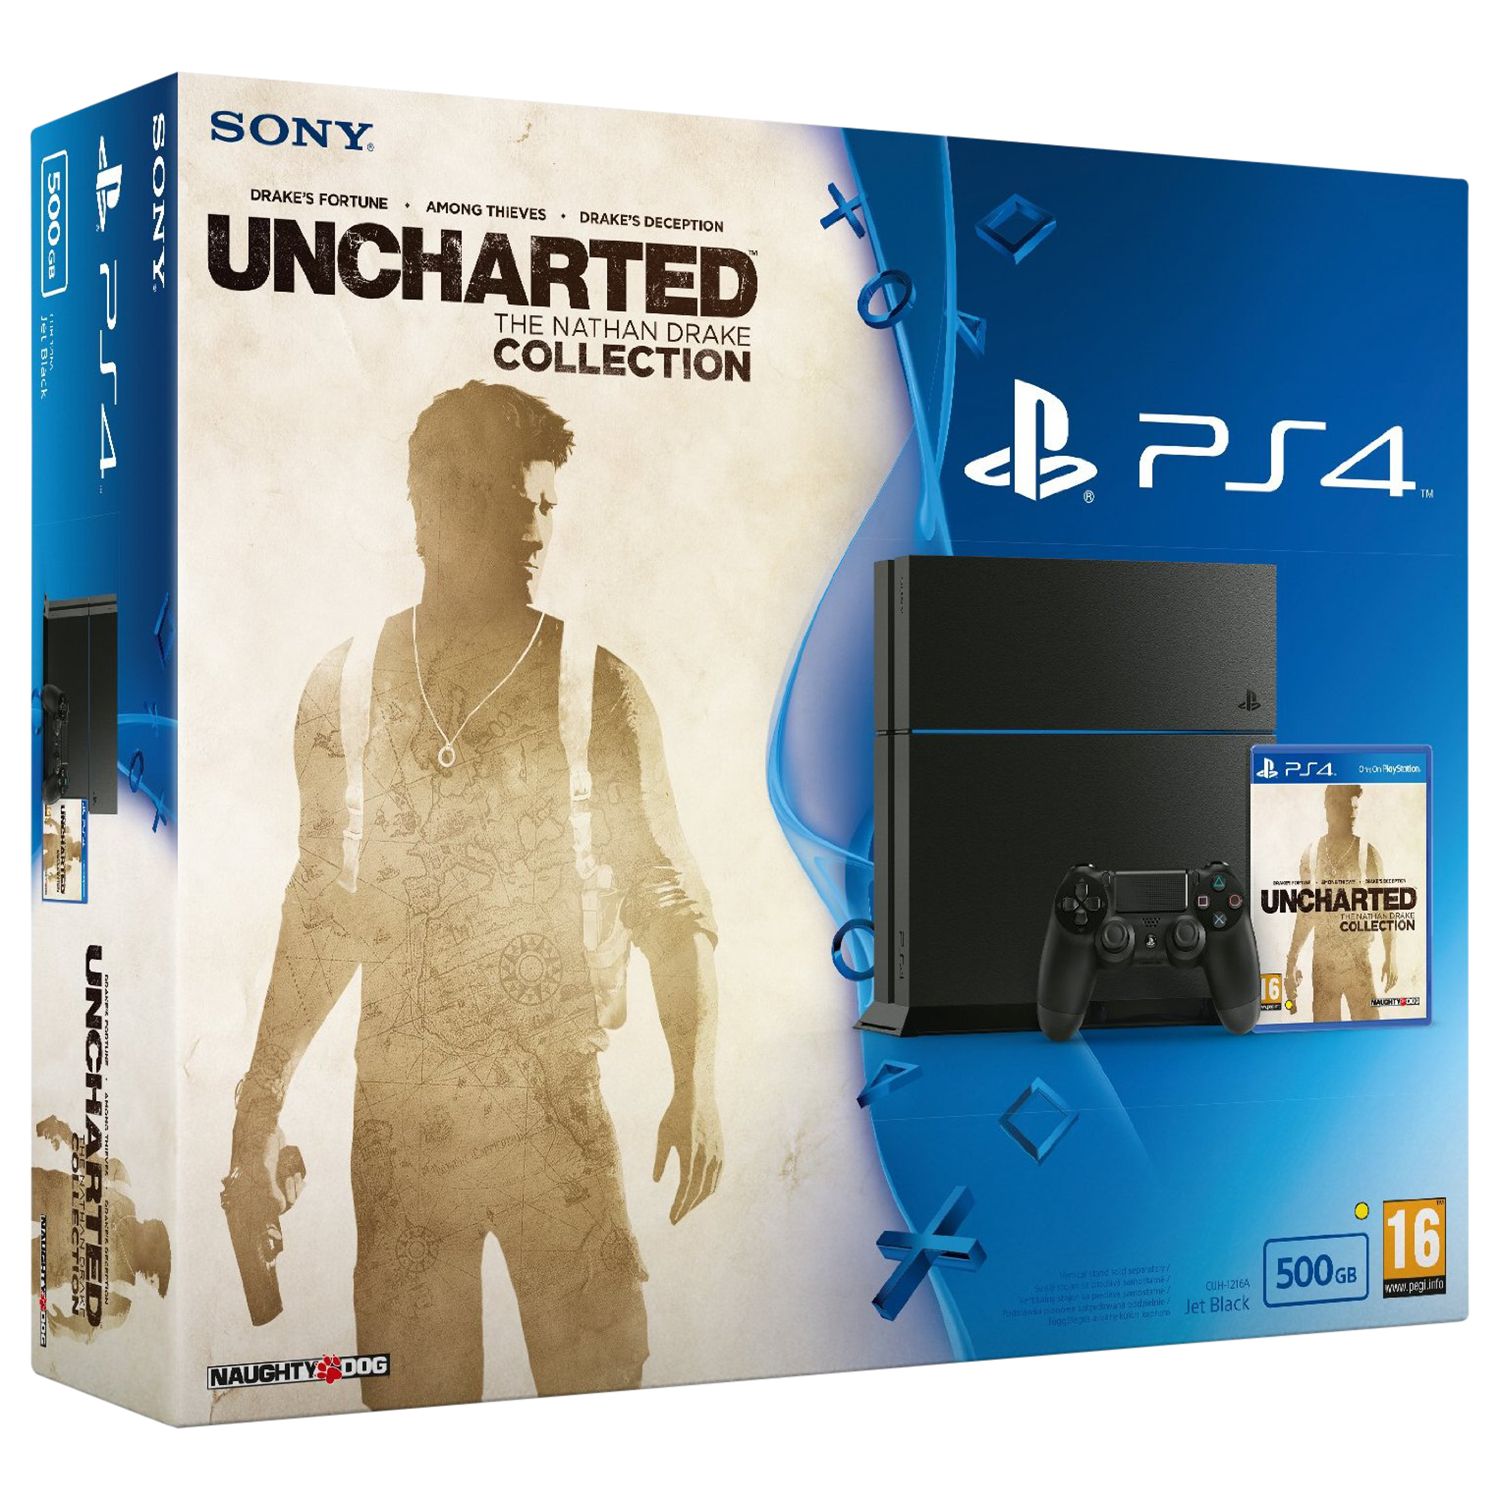 uncharted playstation 4 console